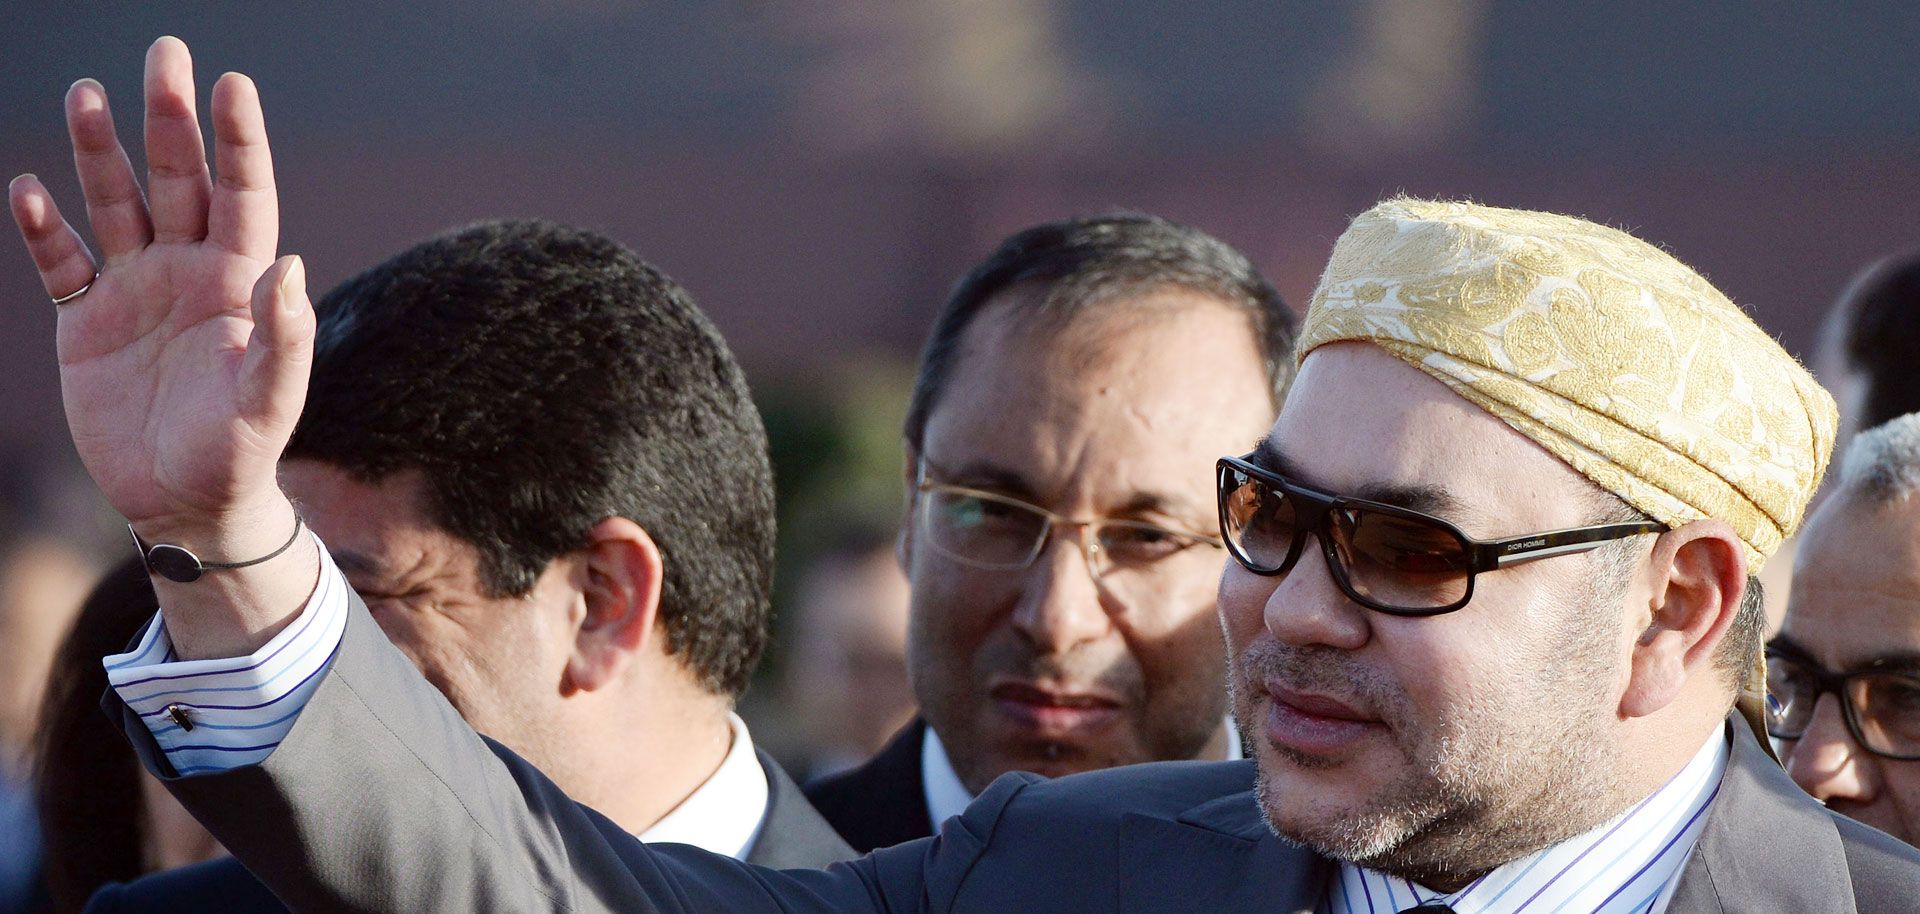 King Mohammed VI, who wants Morocco to take a more prominent role in Africa, has asked to rejoin the African Union, a group his country left in 1984. But standing in the way is a dispute over the status of the Western Sahara.